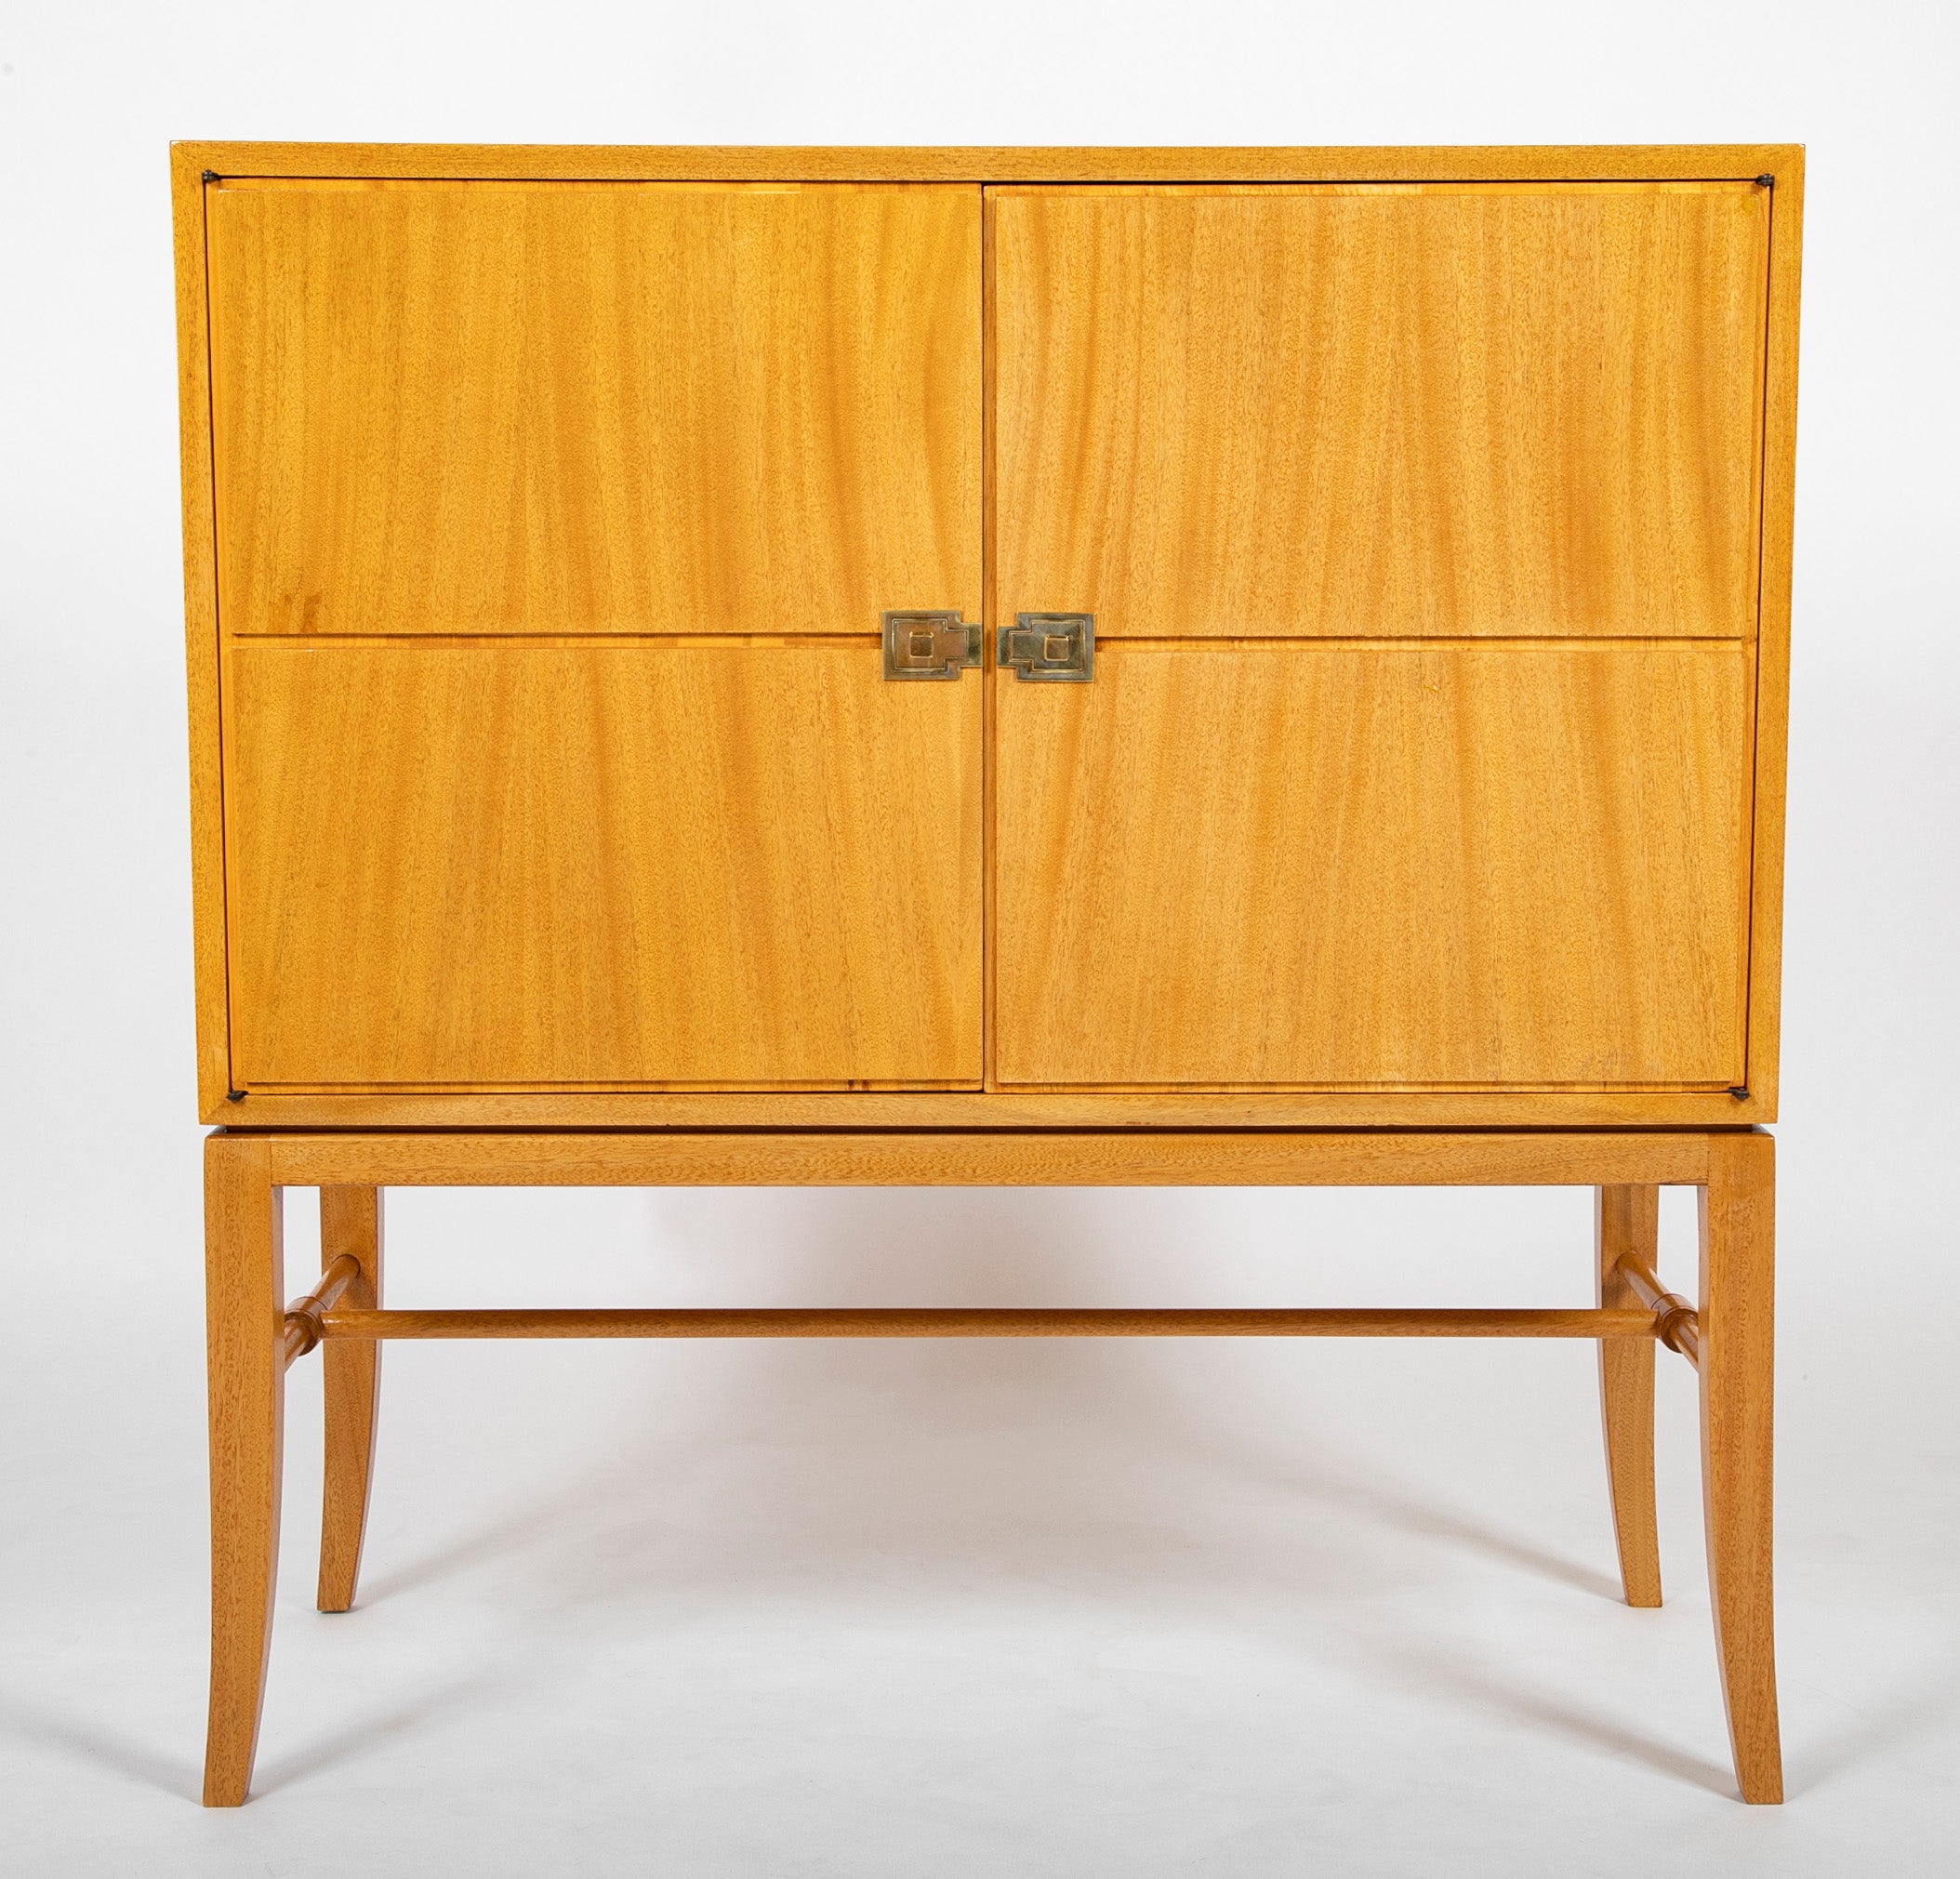 A Tommi Parzinger cabinet with 3 interior drawers